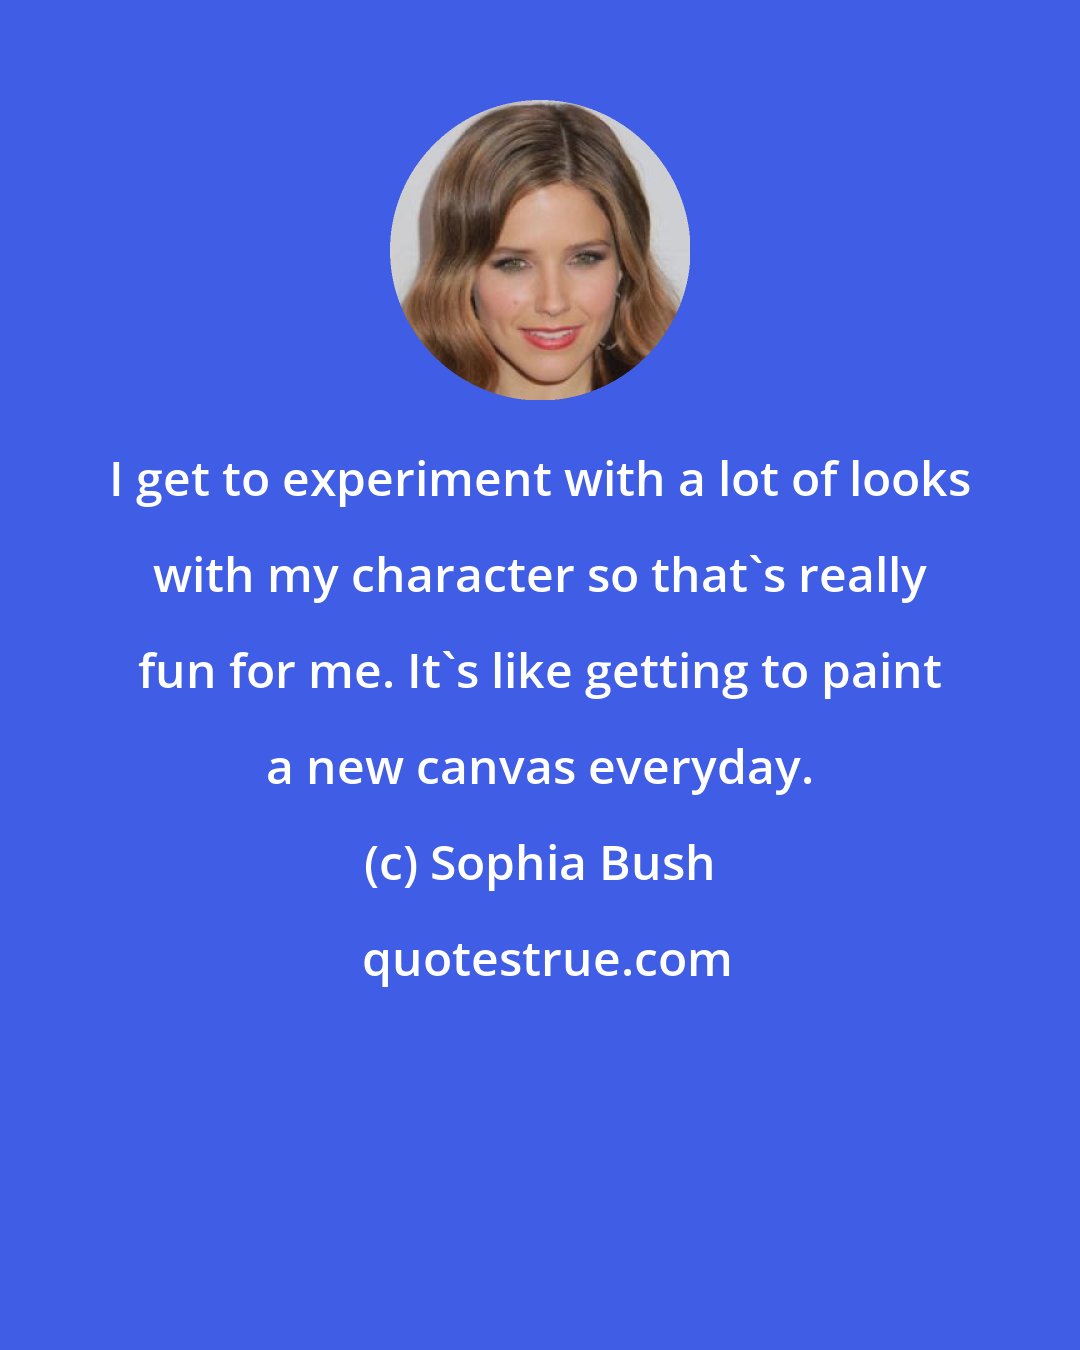 Sophia Bush: I get to experiment with a lot of looks with my character so that's really fun for me. It's like getting to paint a new canvas everyday.